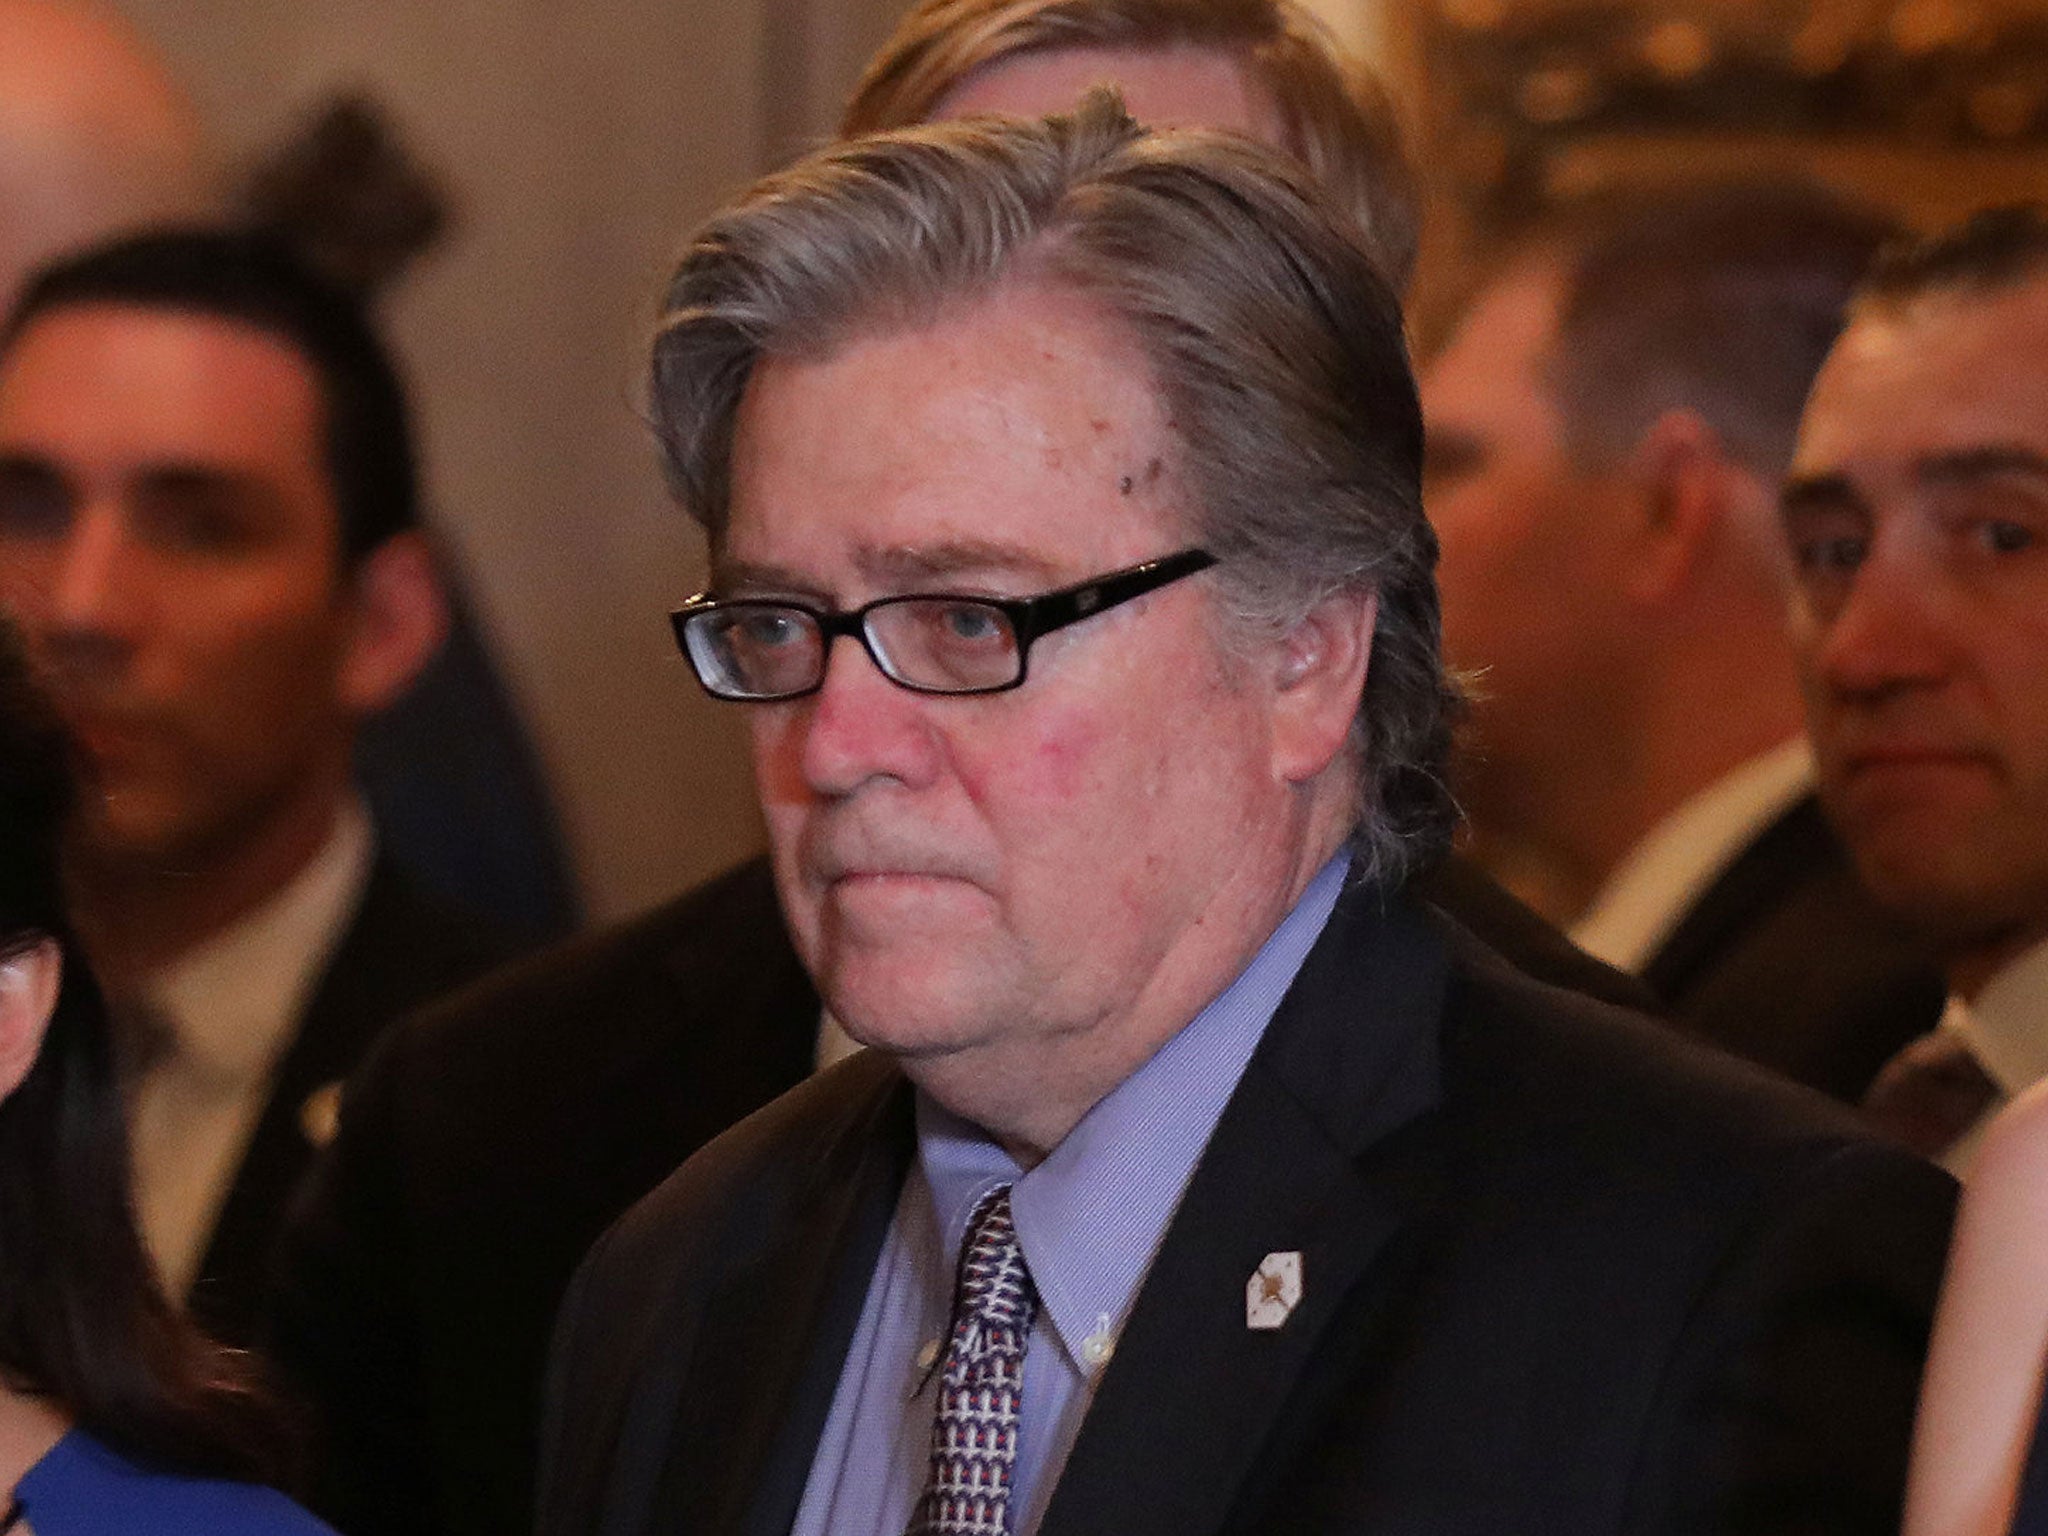 Steve Bannon listens as President Donald Trump delivers a statement about missile strikes on a Syrian airfield at the Mar-a-Lago estate in Florida